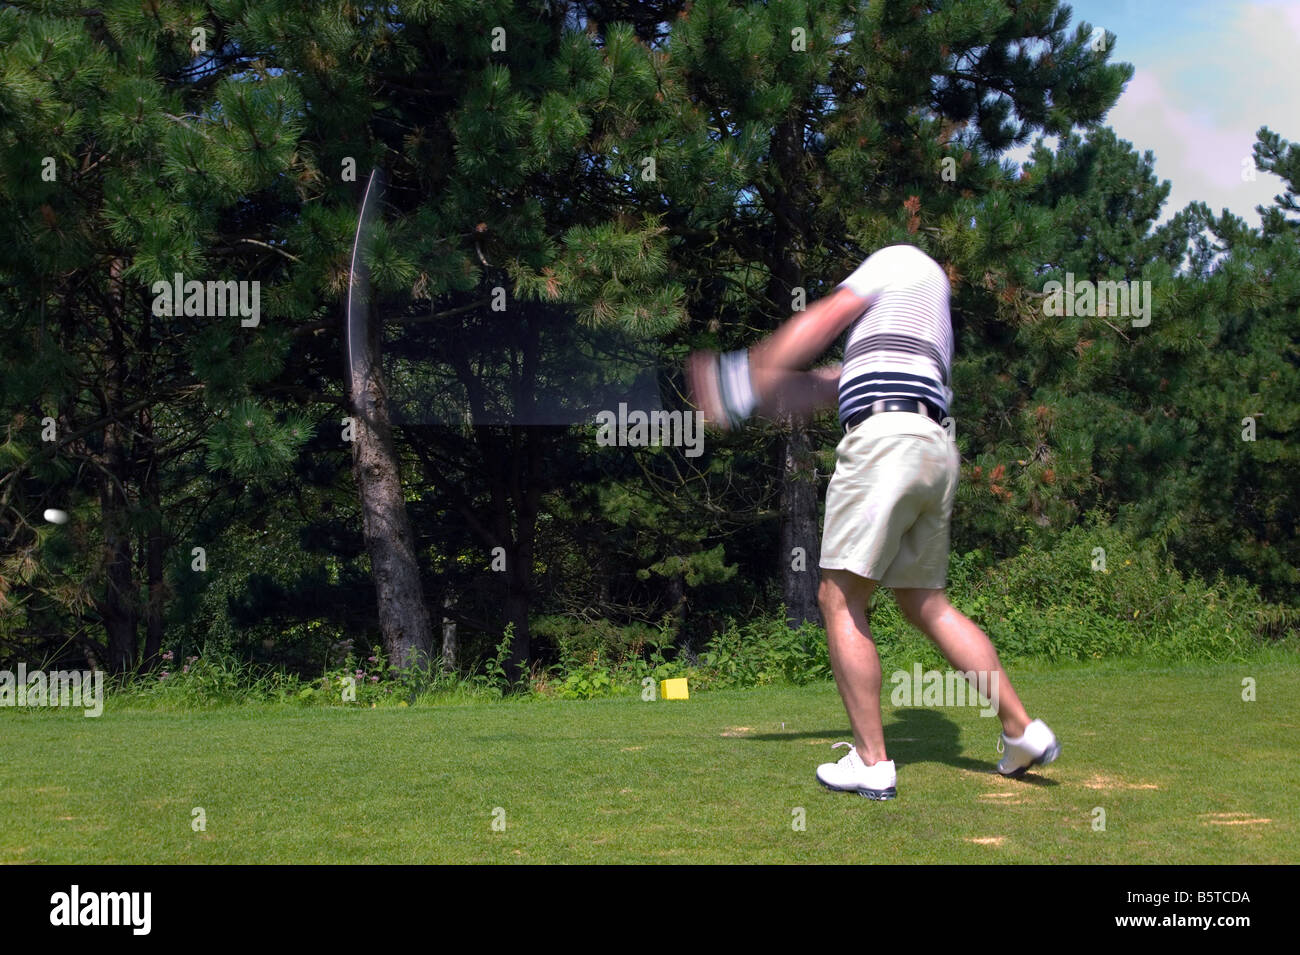 Golfer taking a tee shot with motion blur Stock Photo